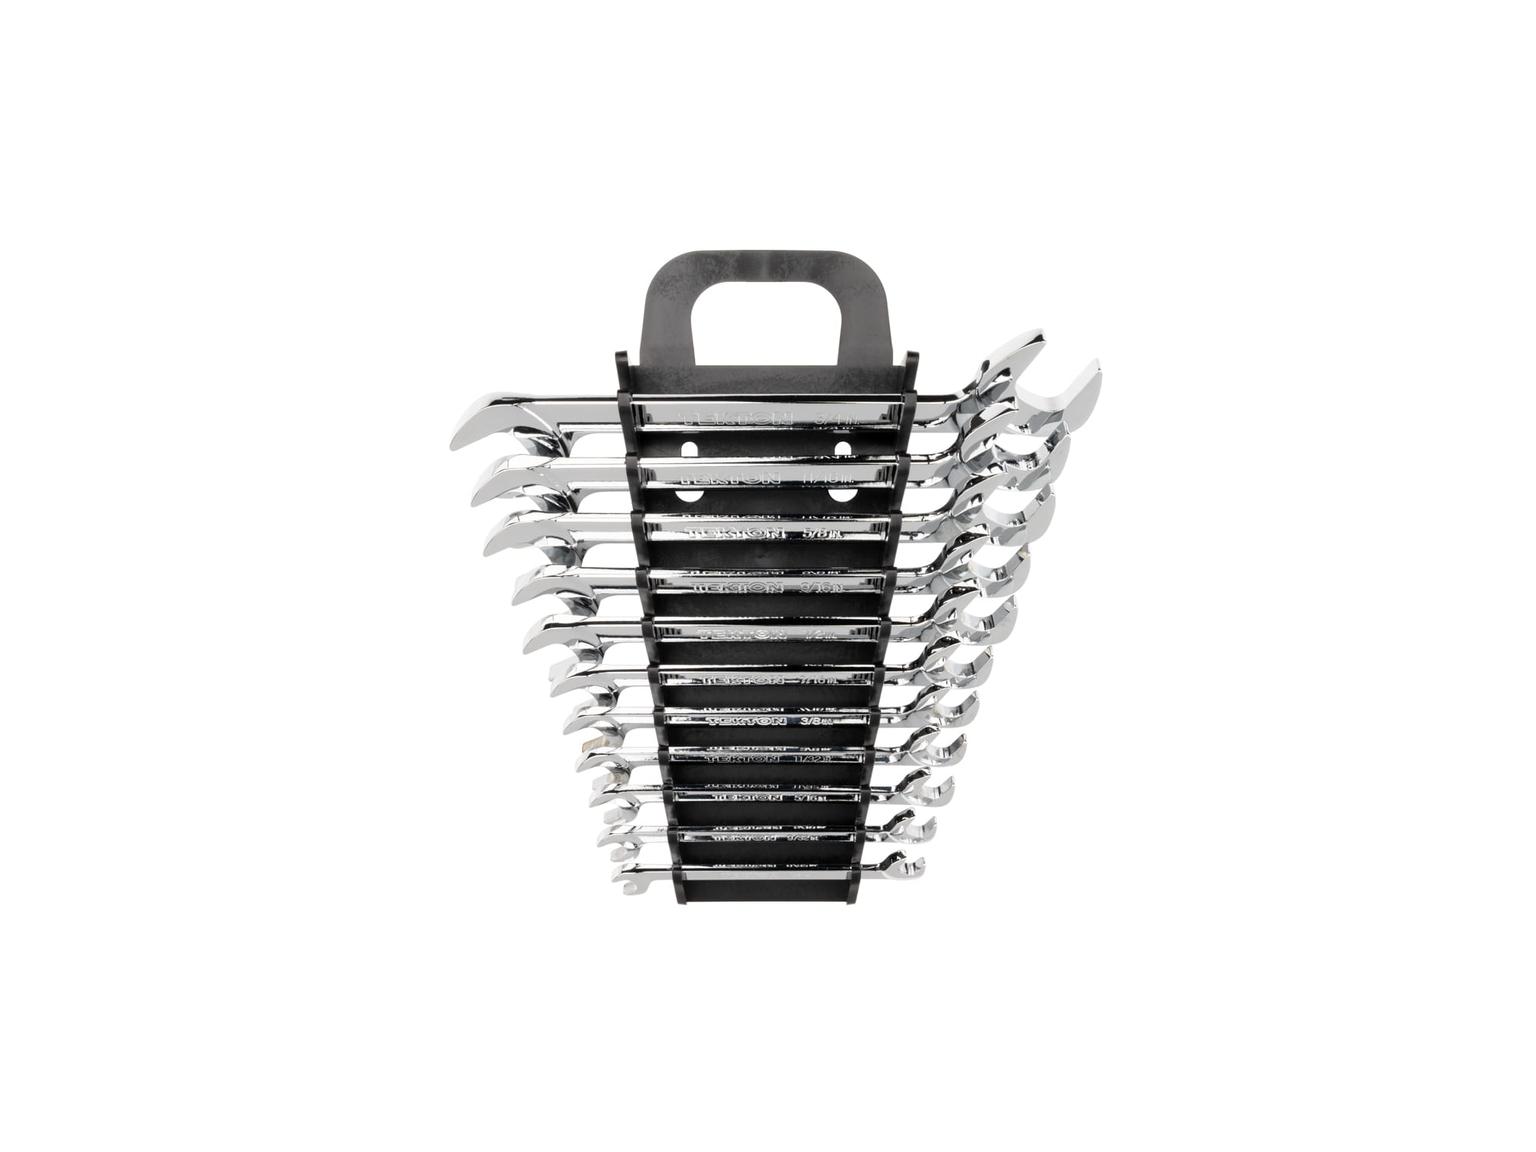 Angle Head Open End Wrench Set, 11-Piece (1/4-3/4 in.) with Holder